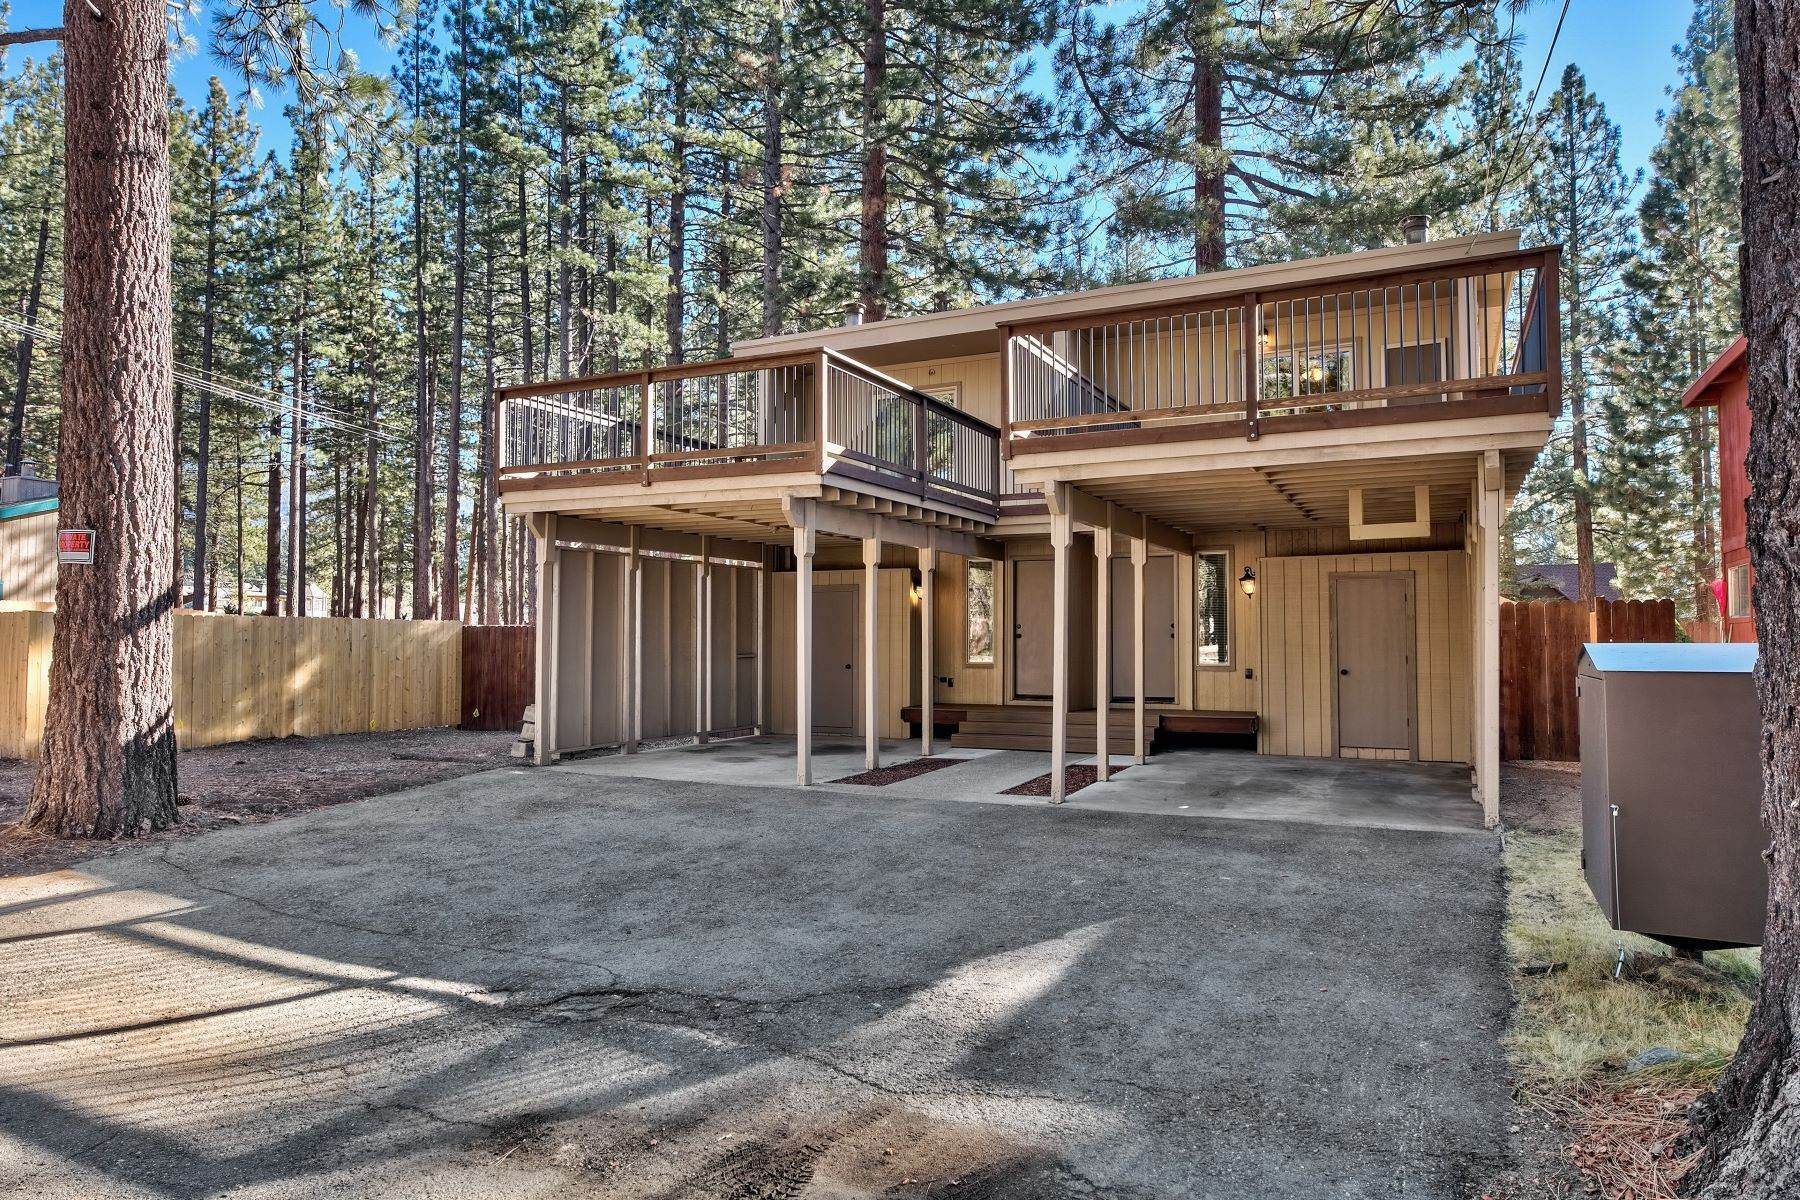 Property for Active at Beautifully Remodeled Duplex 2424 Ponderosa St South Lake Tahoe, California 96150 United States